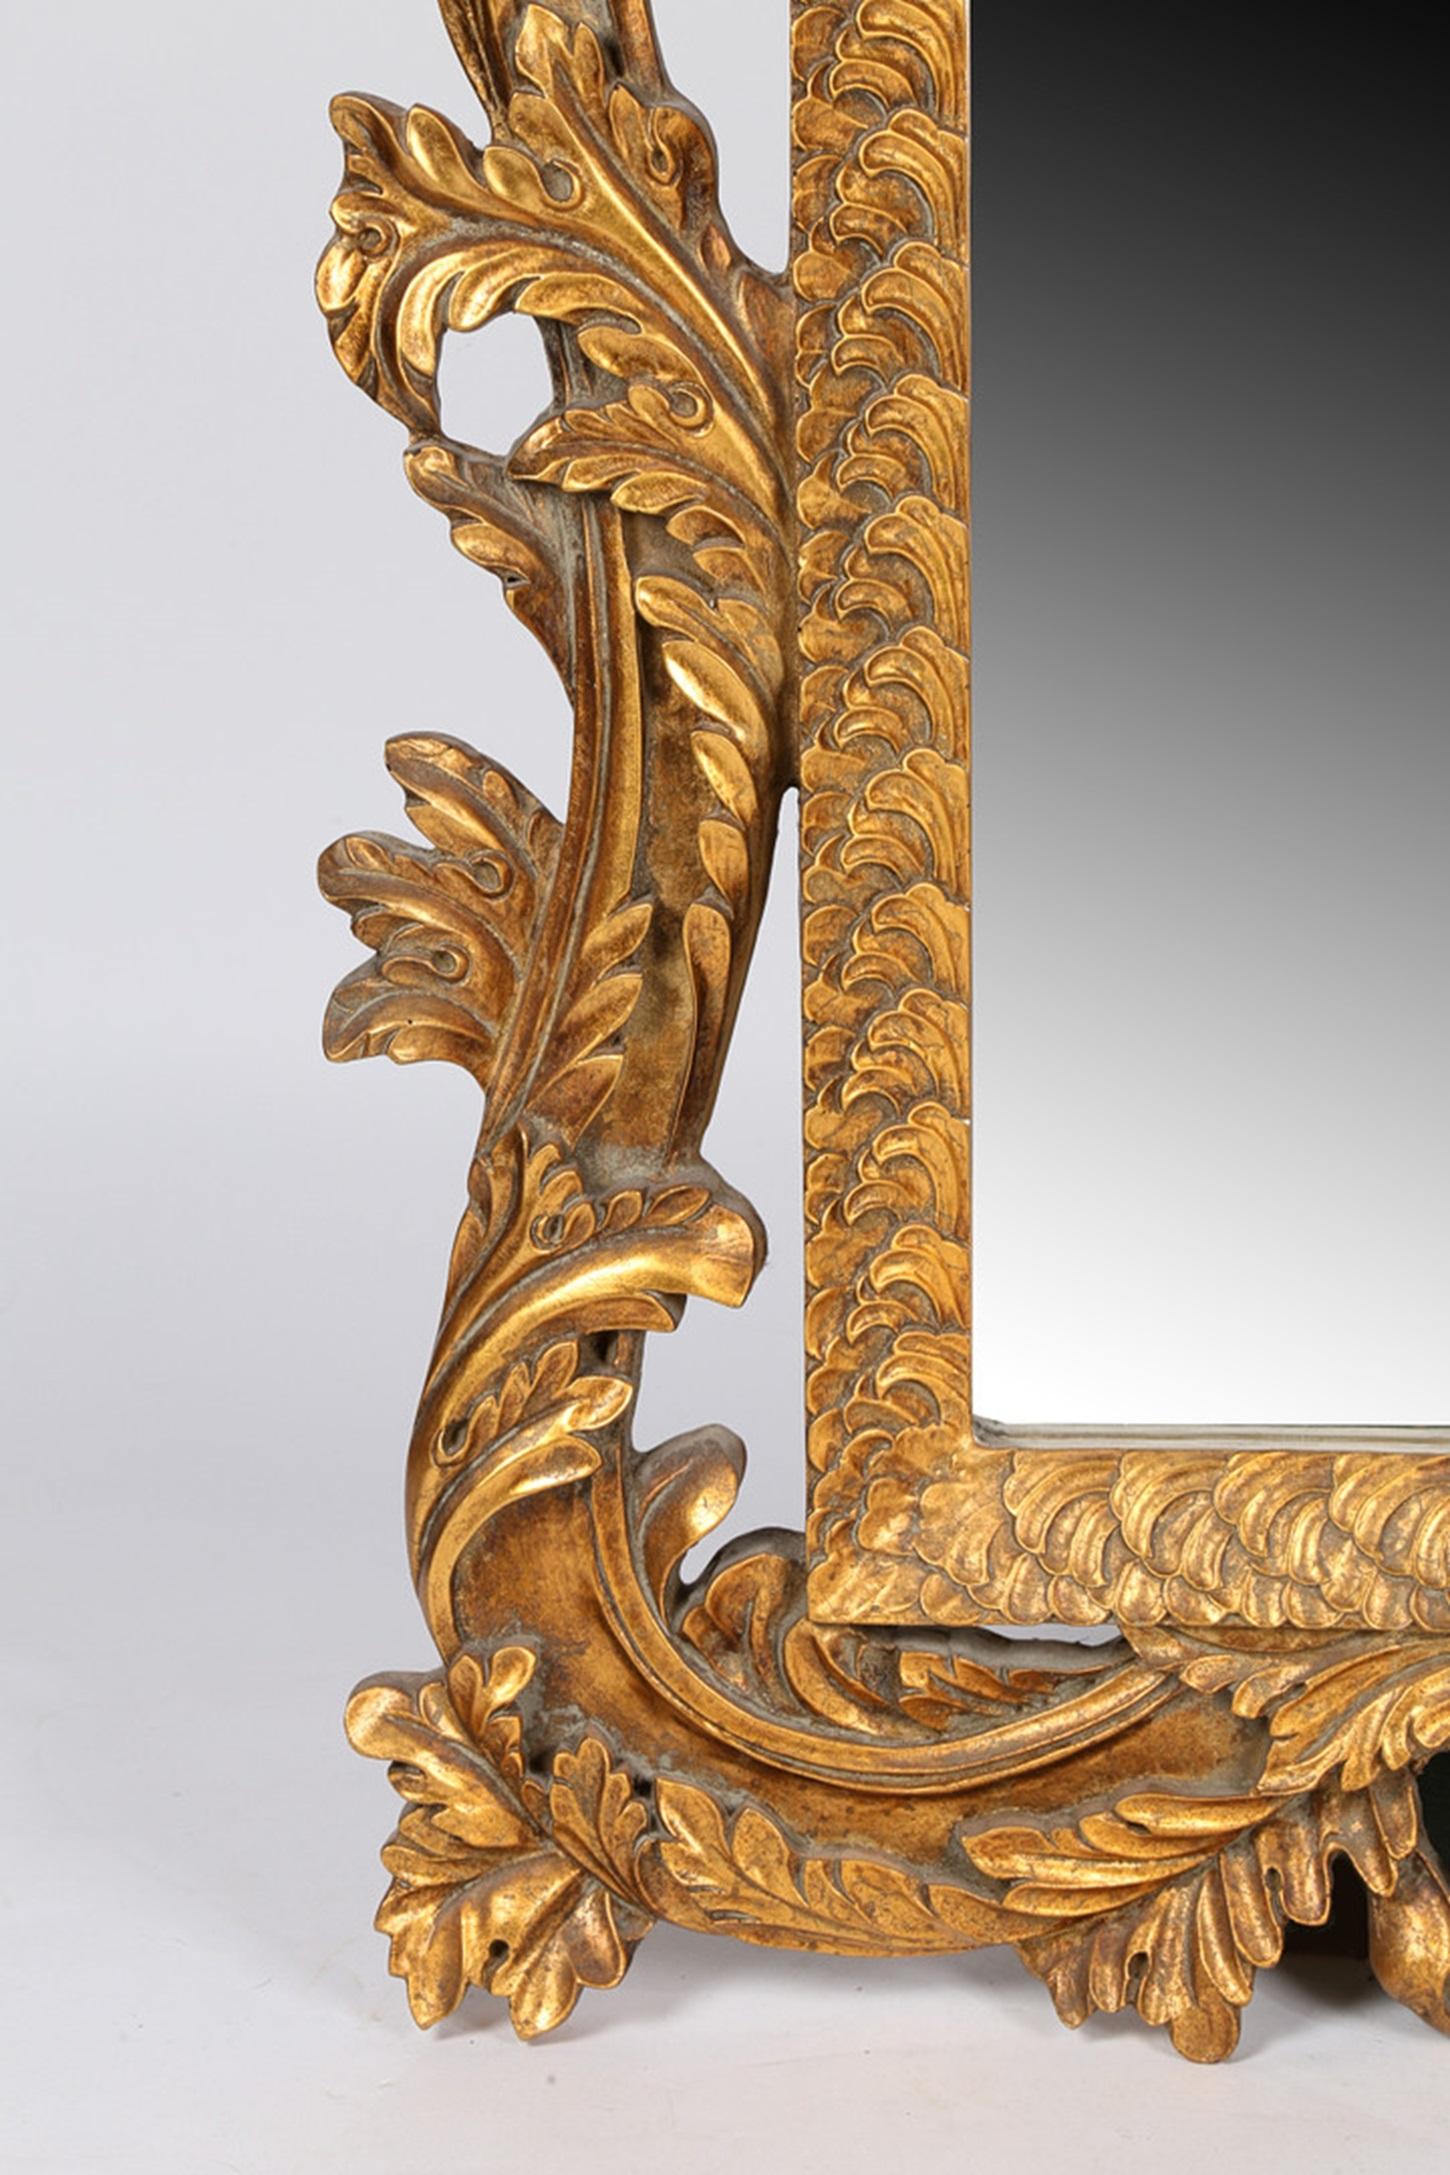 Early 20th Century Gilt Luxury Wall Mirror, Rare Large Antique Rococo English Floral Console Mirror For Sale